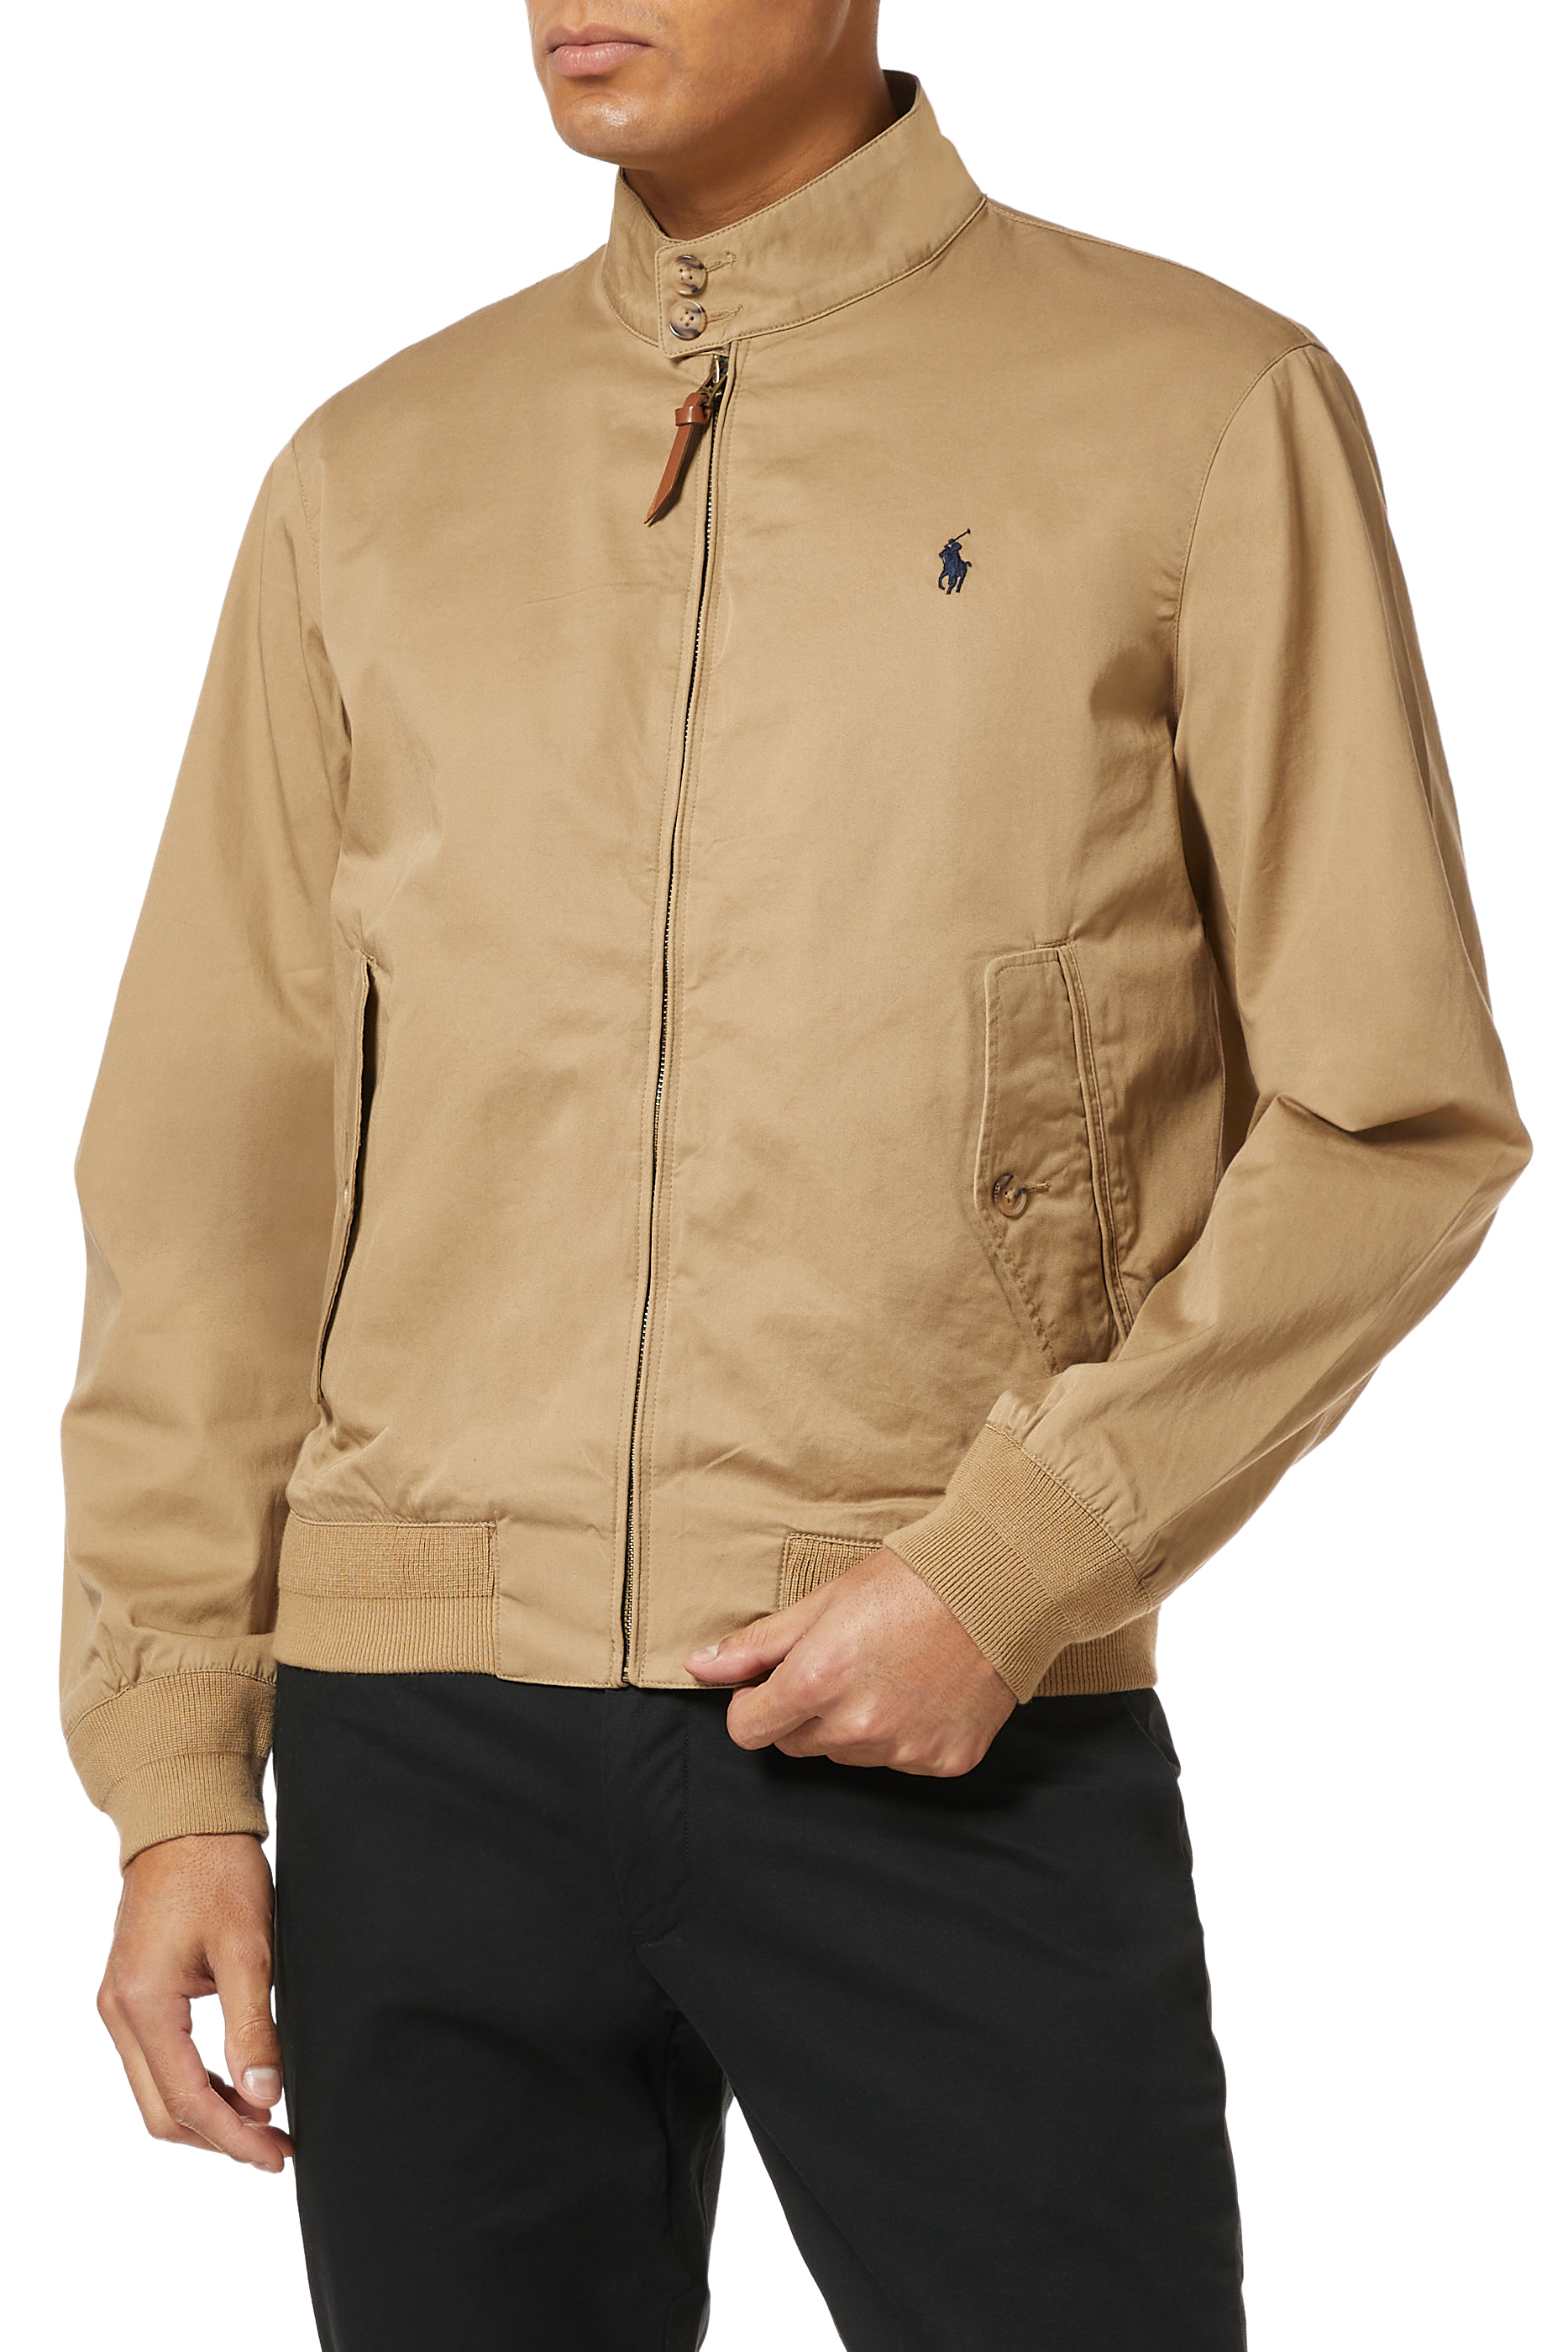 Buy Polo Ralph Lauren Twill Jacket - Mens for SAR 810.00 Sale ...